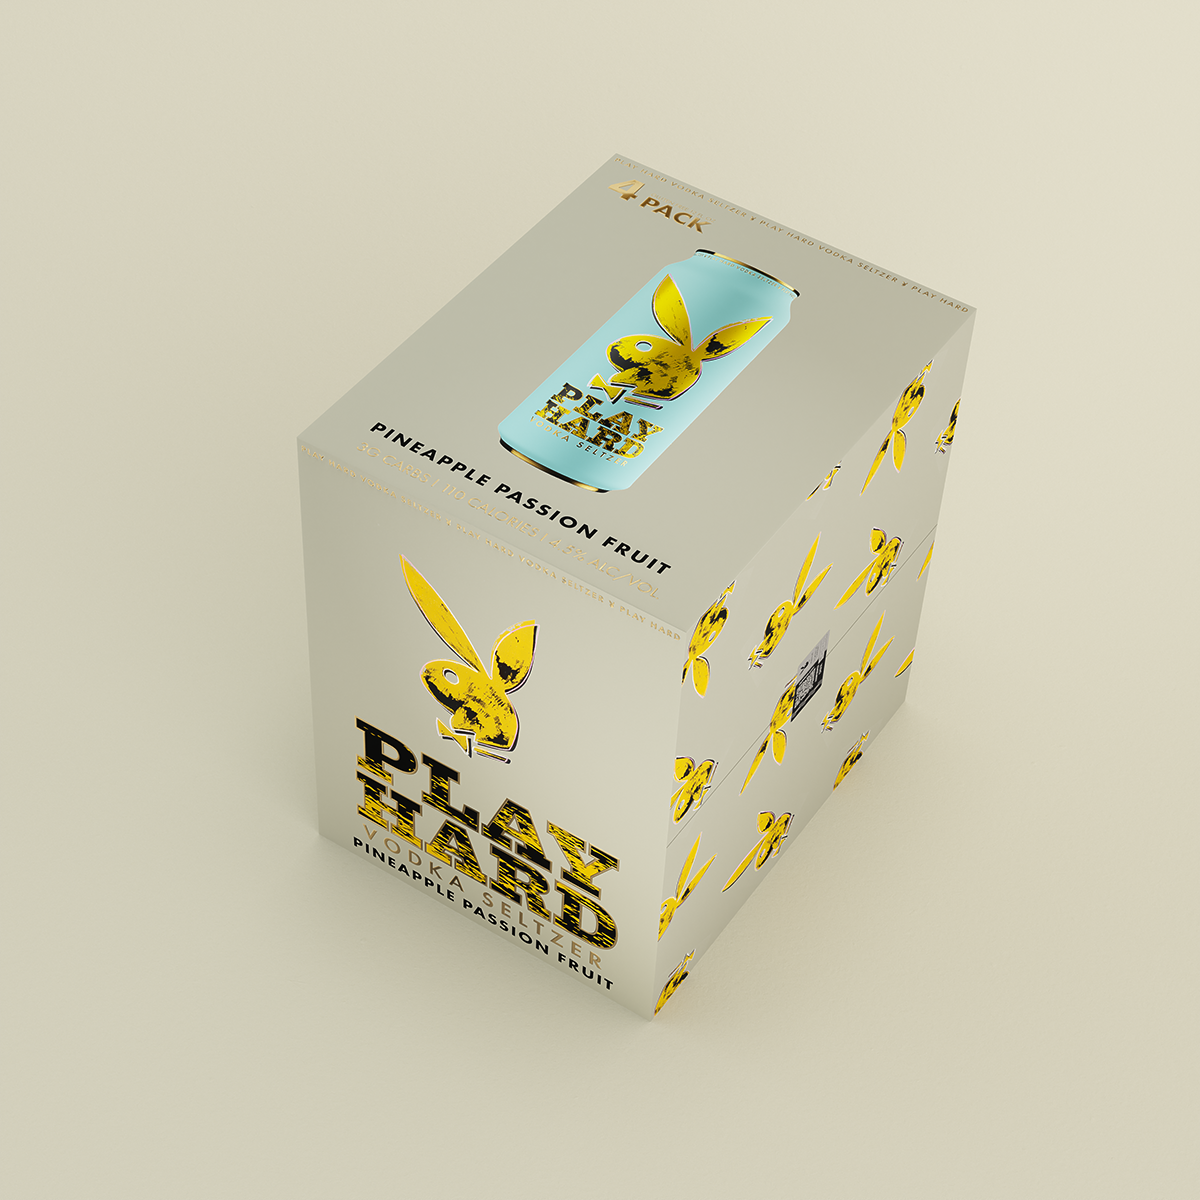 Top perspective view of the Play Hard Vodka Seltzer Pineapple Passion Fruit case.